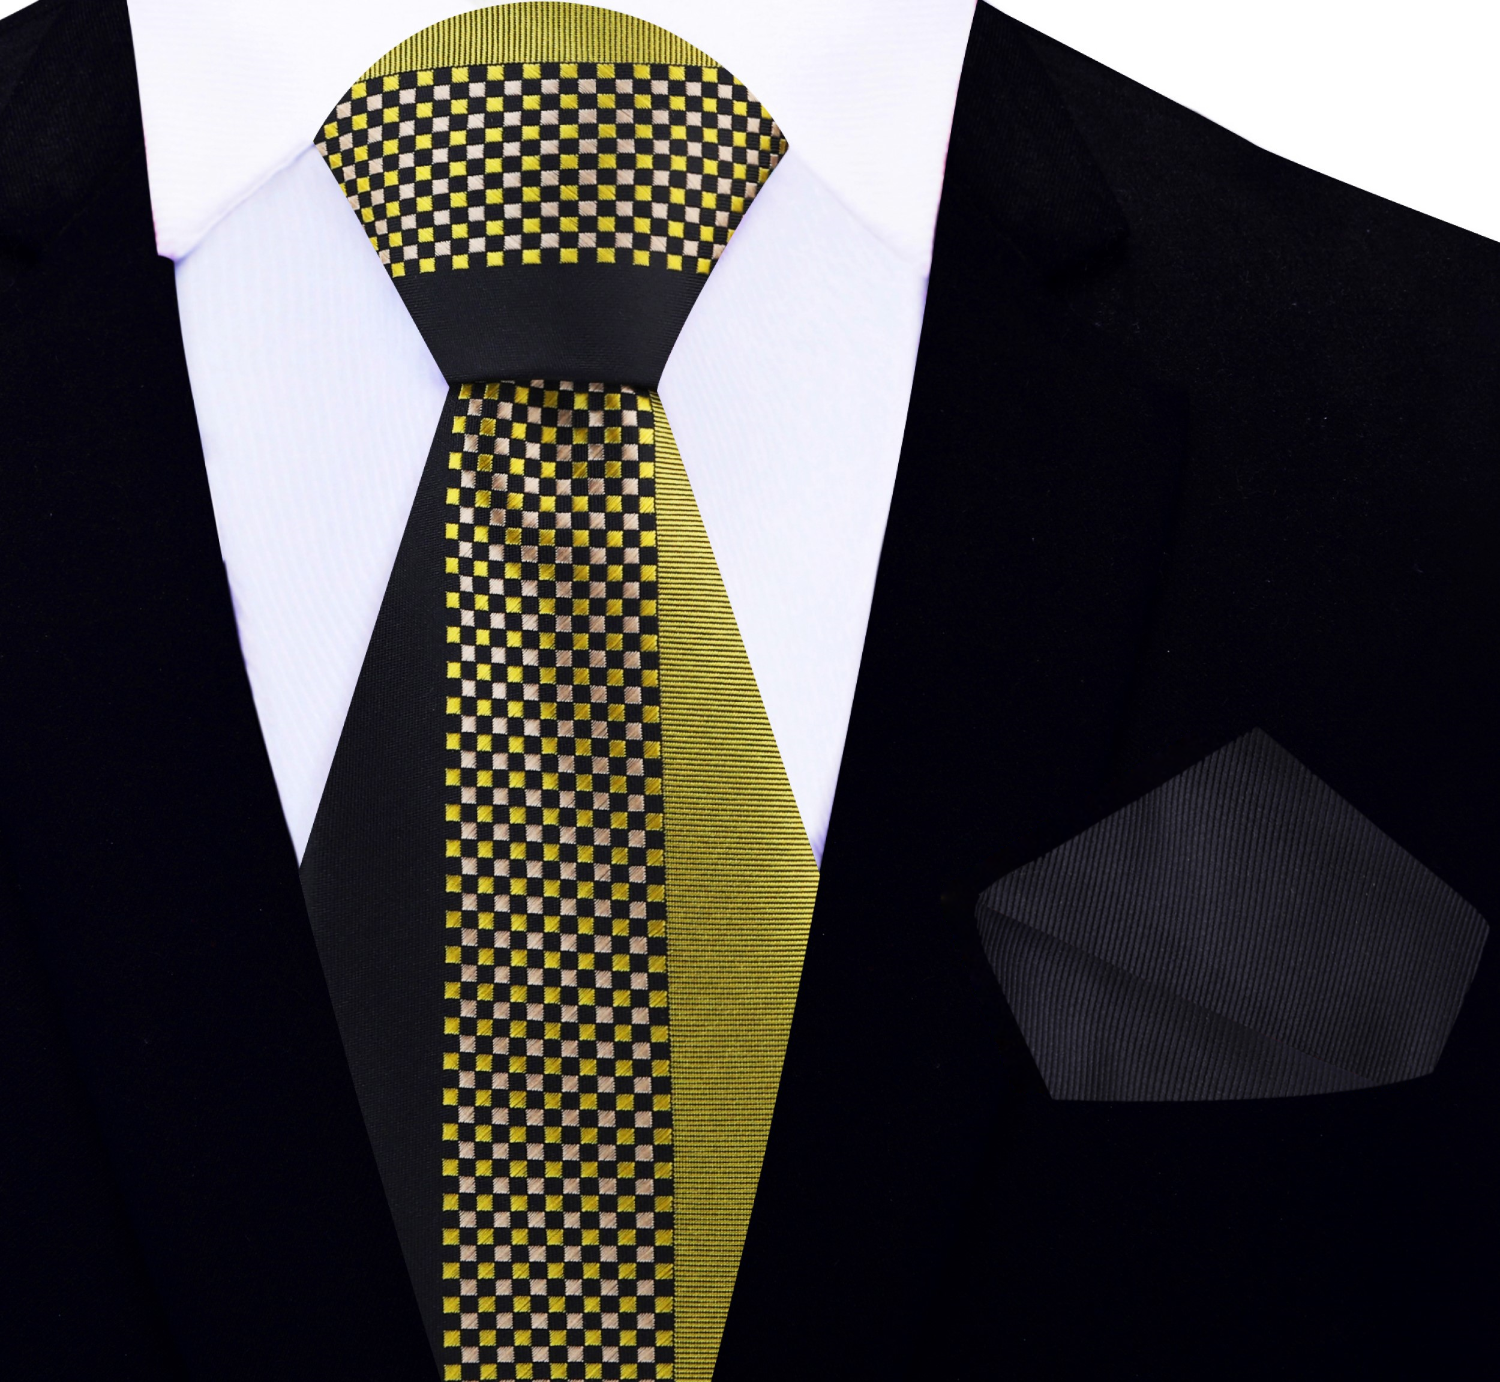 Main View: Gold and Black Small Check Necktie and Black Square